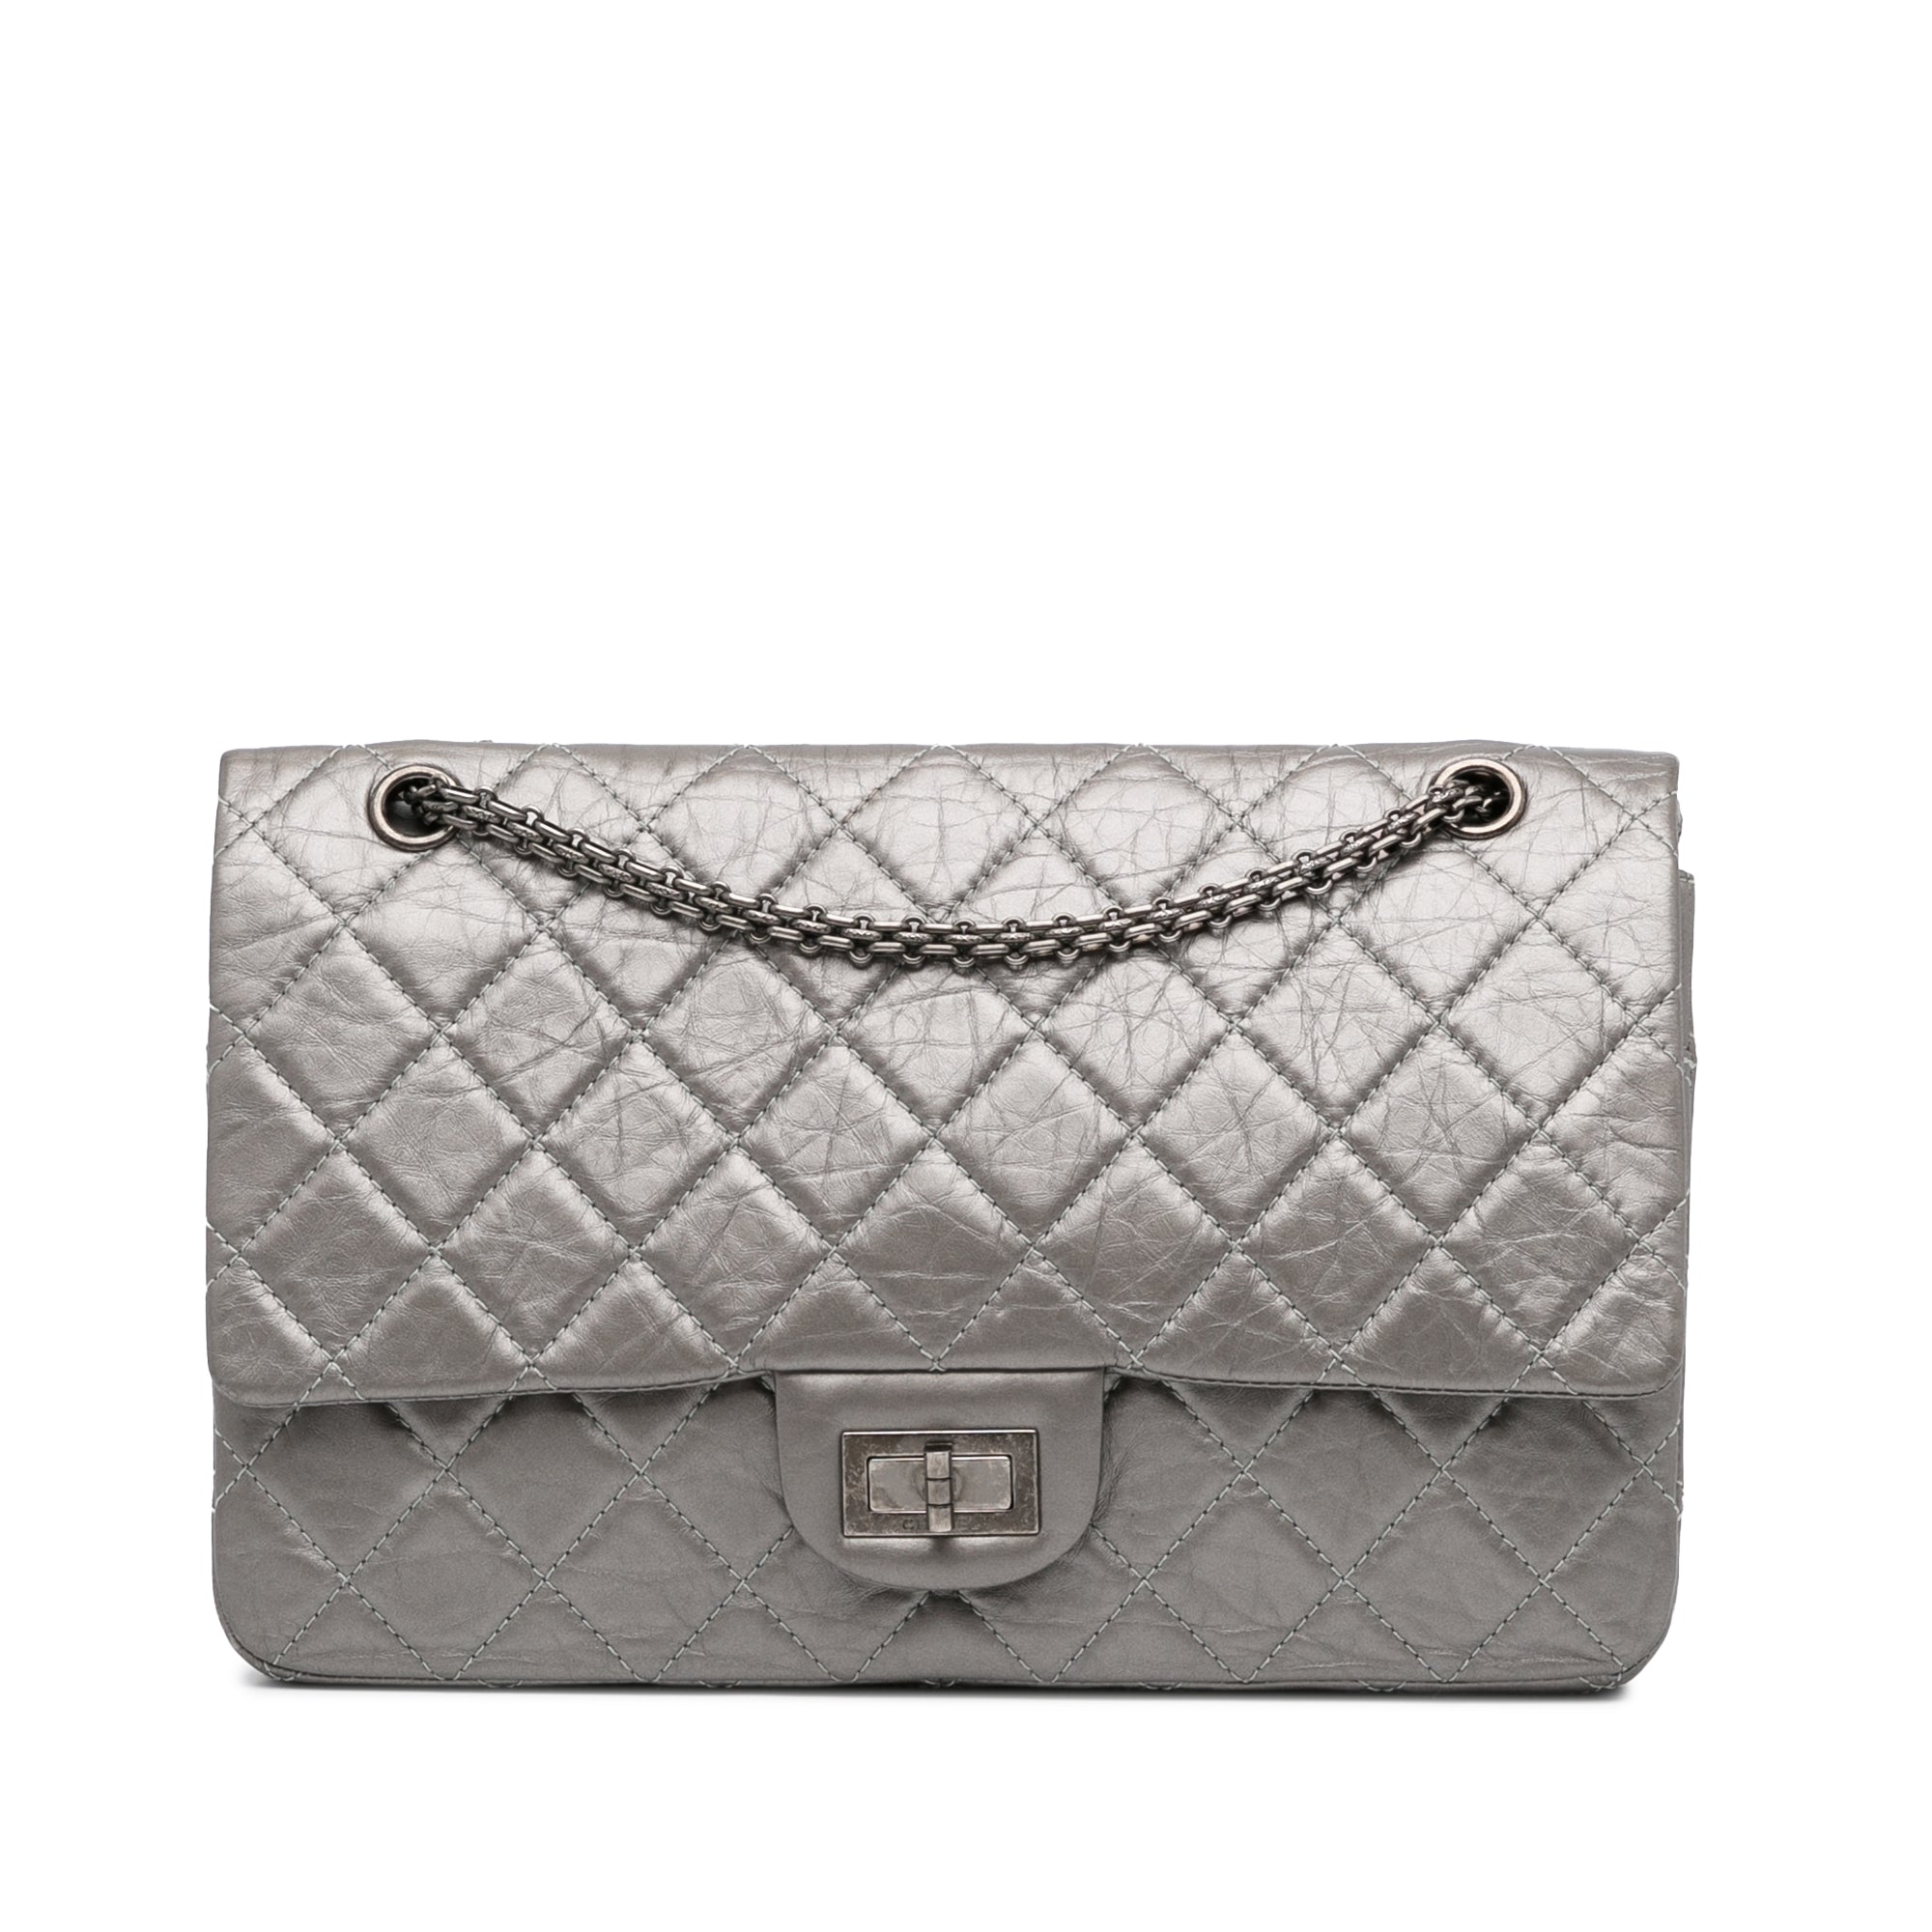 Chanel - Authenticated 2.55 Handbag - Leather Silver Plain for Women, Never Worn